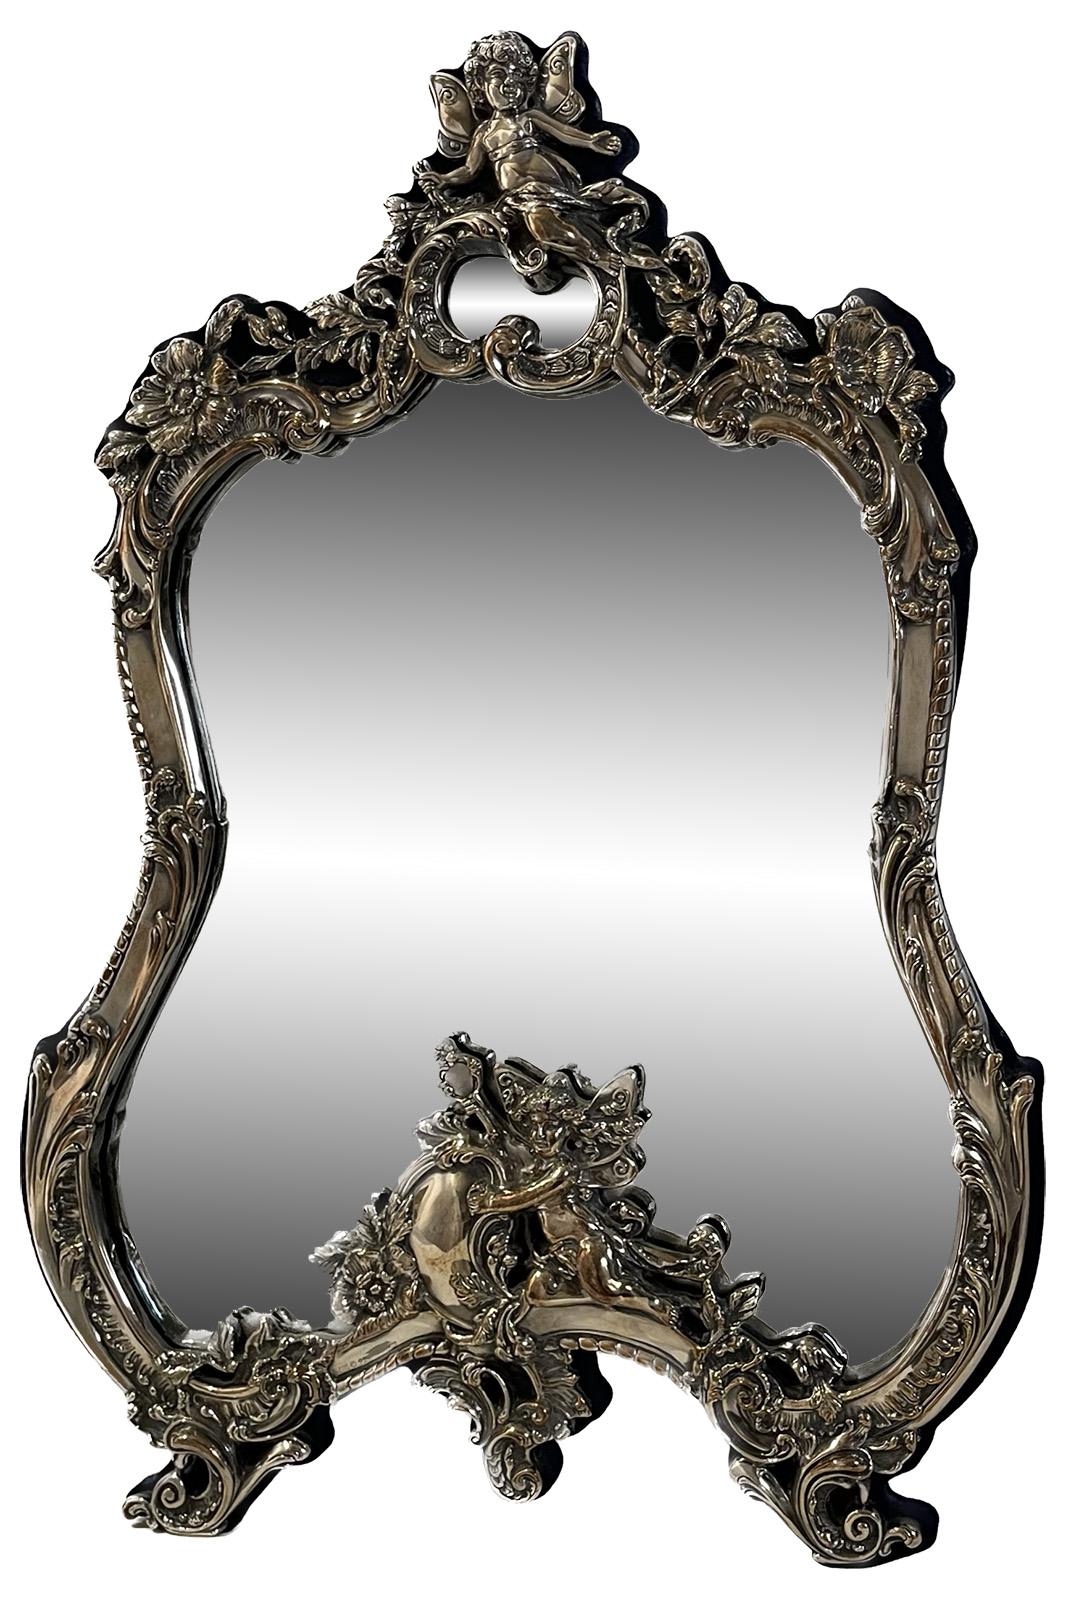 A sterling silver victorian style table mirror with cherubs and flowers. Marked 925 near the base.

Dimensions: 20.5